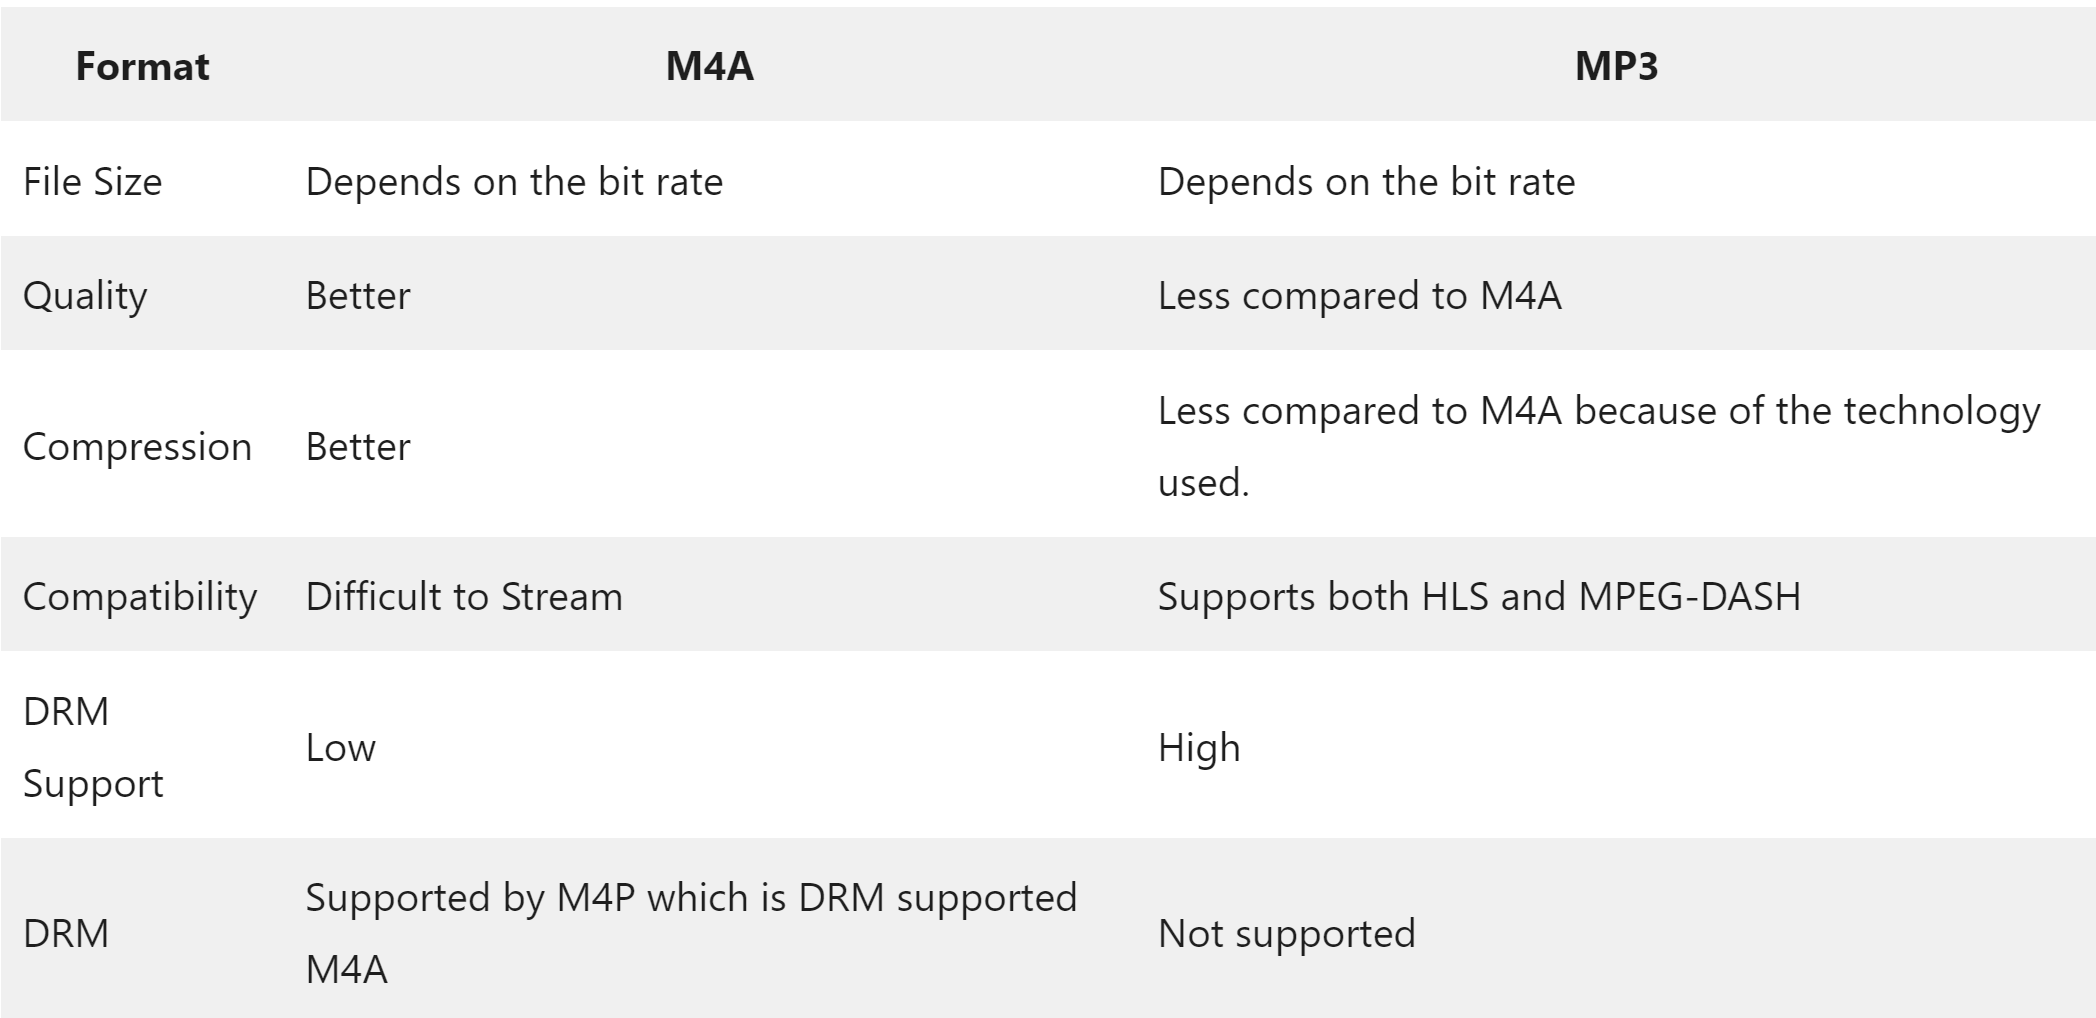 Is M4A Better Than MP3?